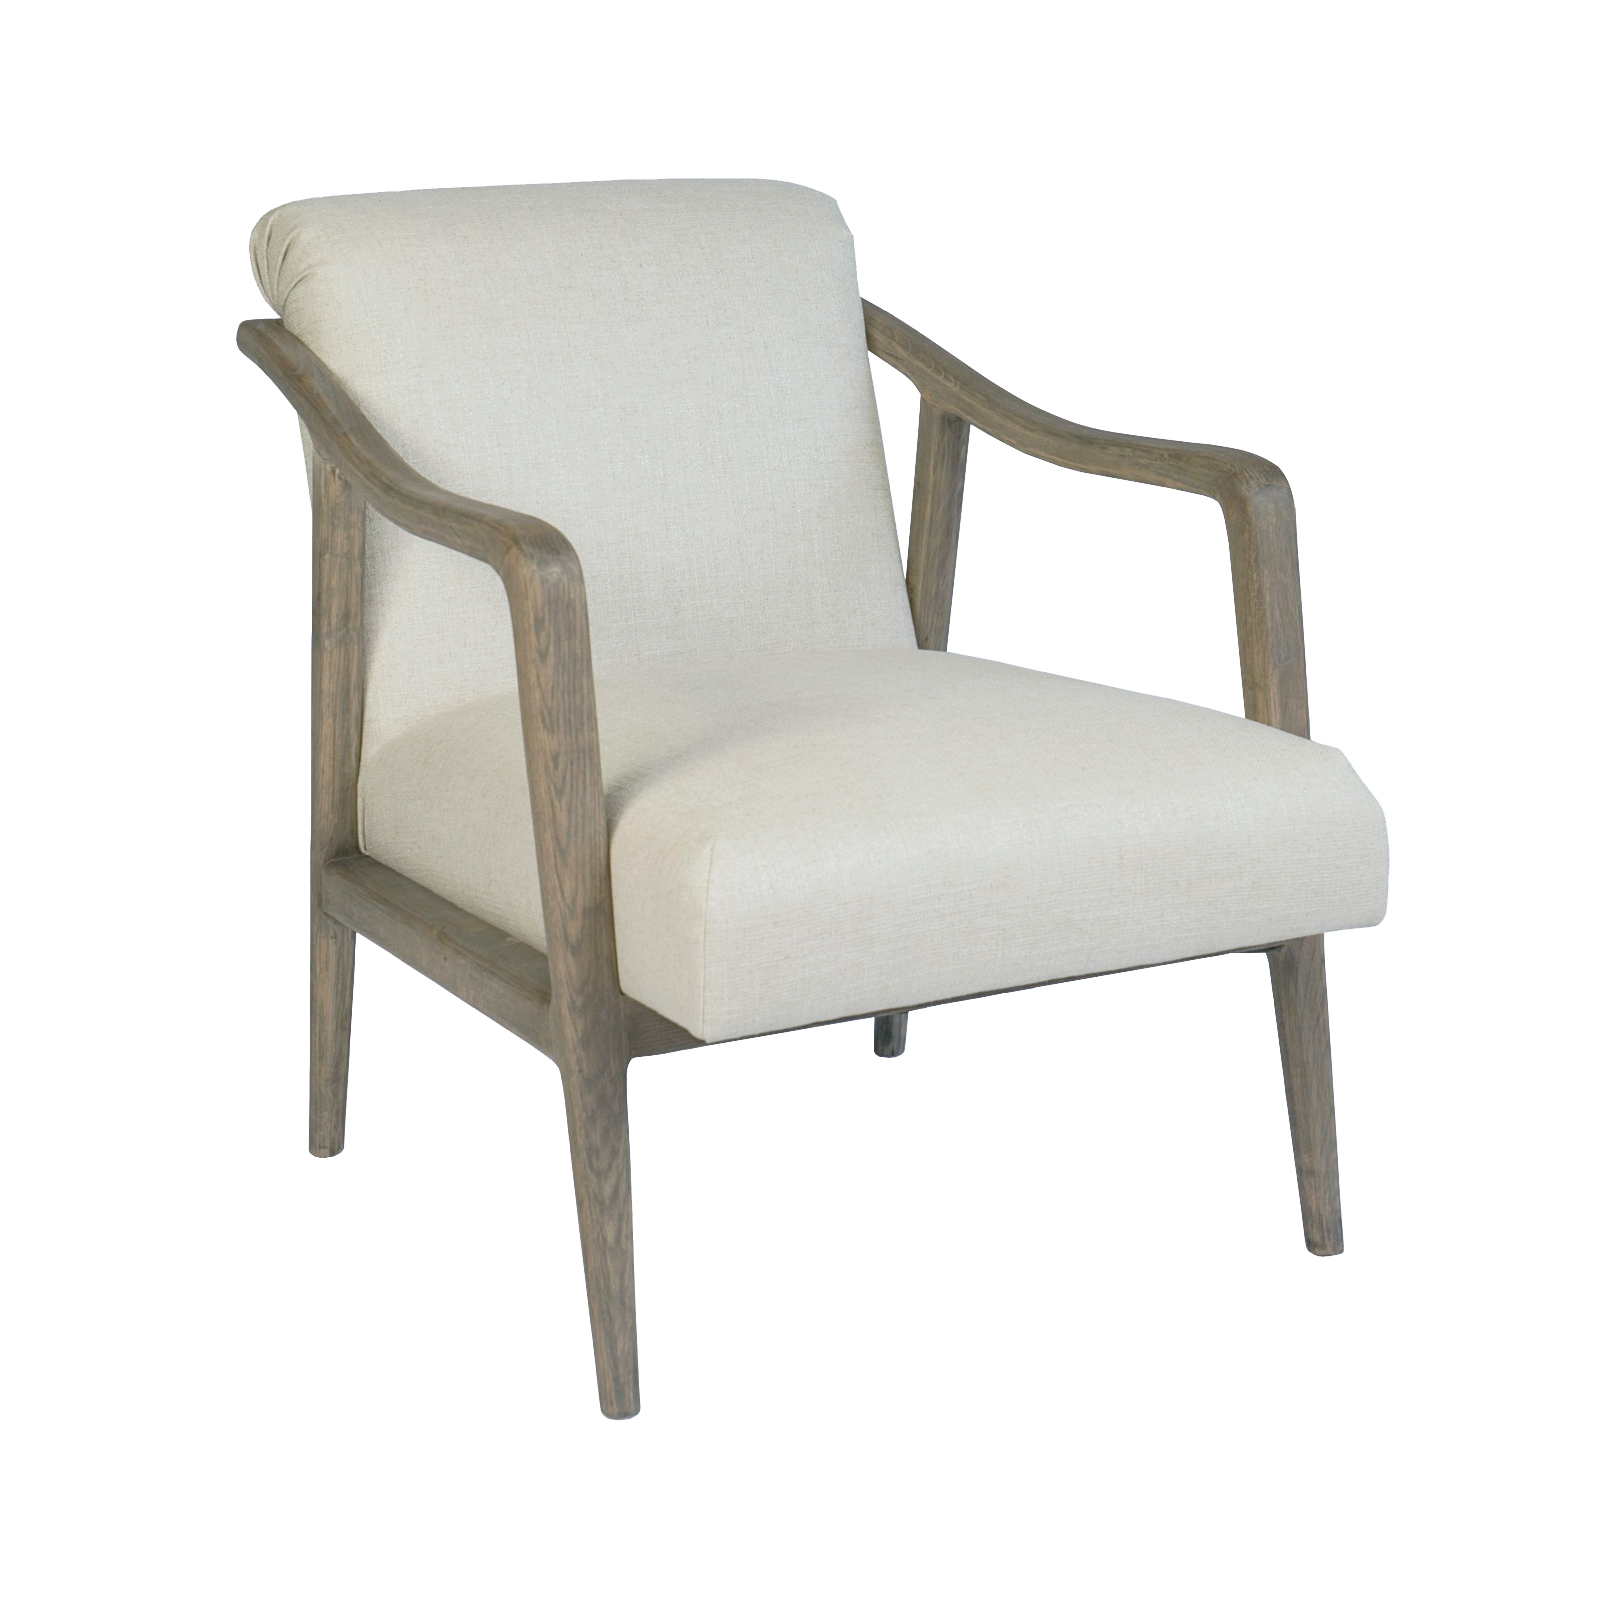 A Pair Of Alton Natural Ecru Linen Chairs The Alton Chair Is A Classic And Sophisticated Weathered - Bild 5 aus 5